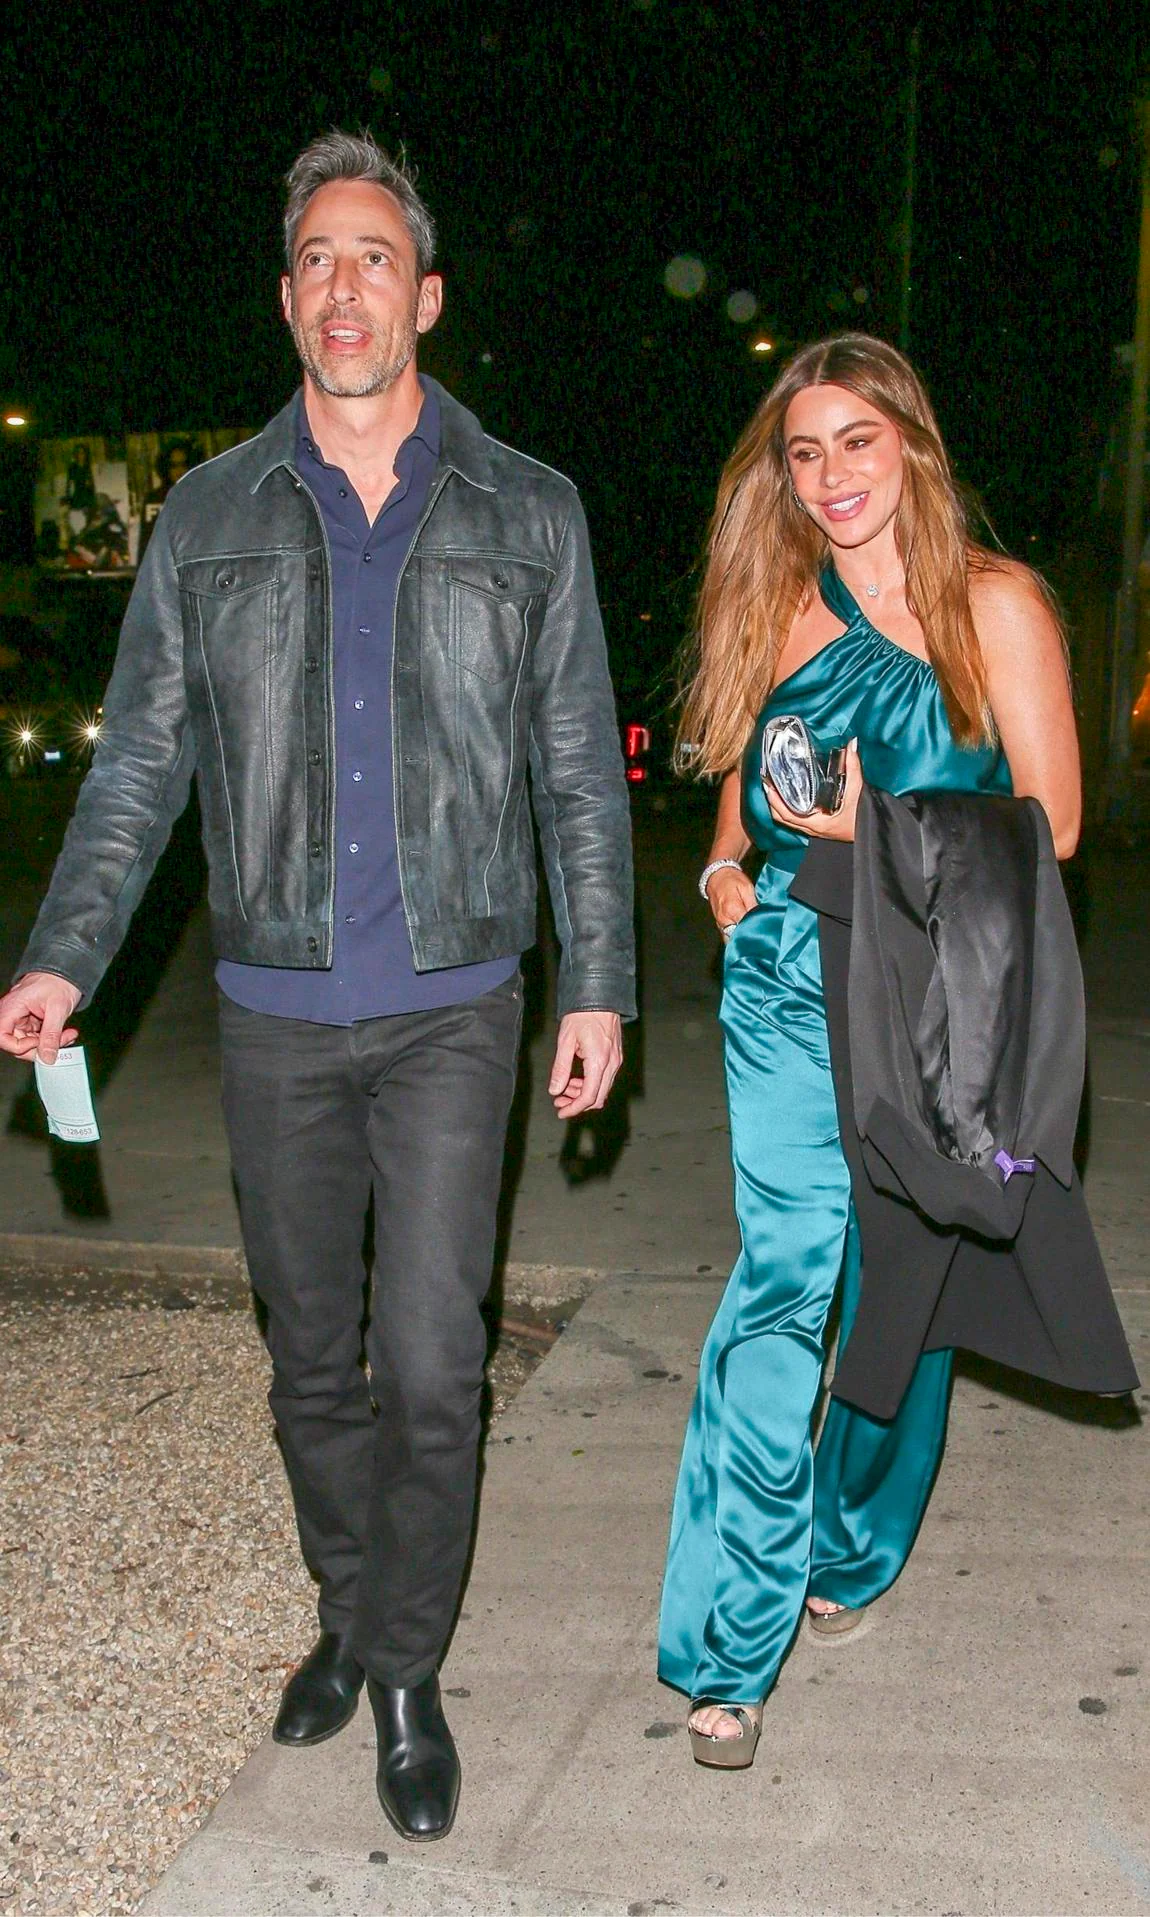 During the couple’s first public outing, sofia vergara and boy friend they were spotted both at the Italian eatery